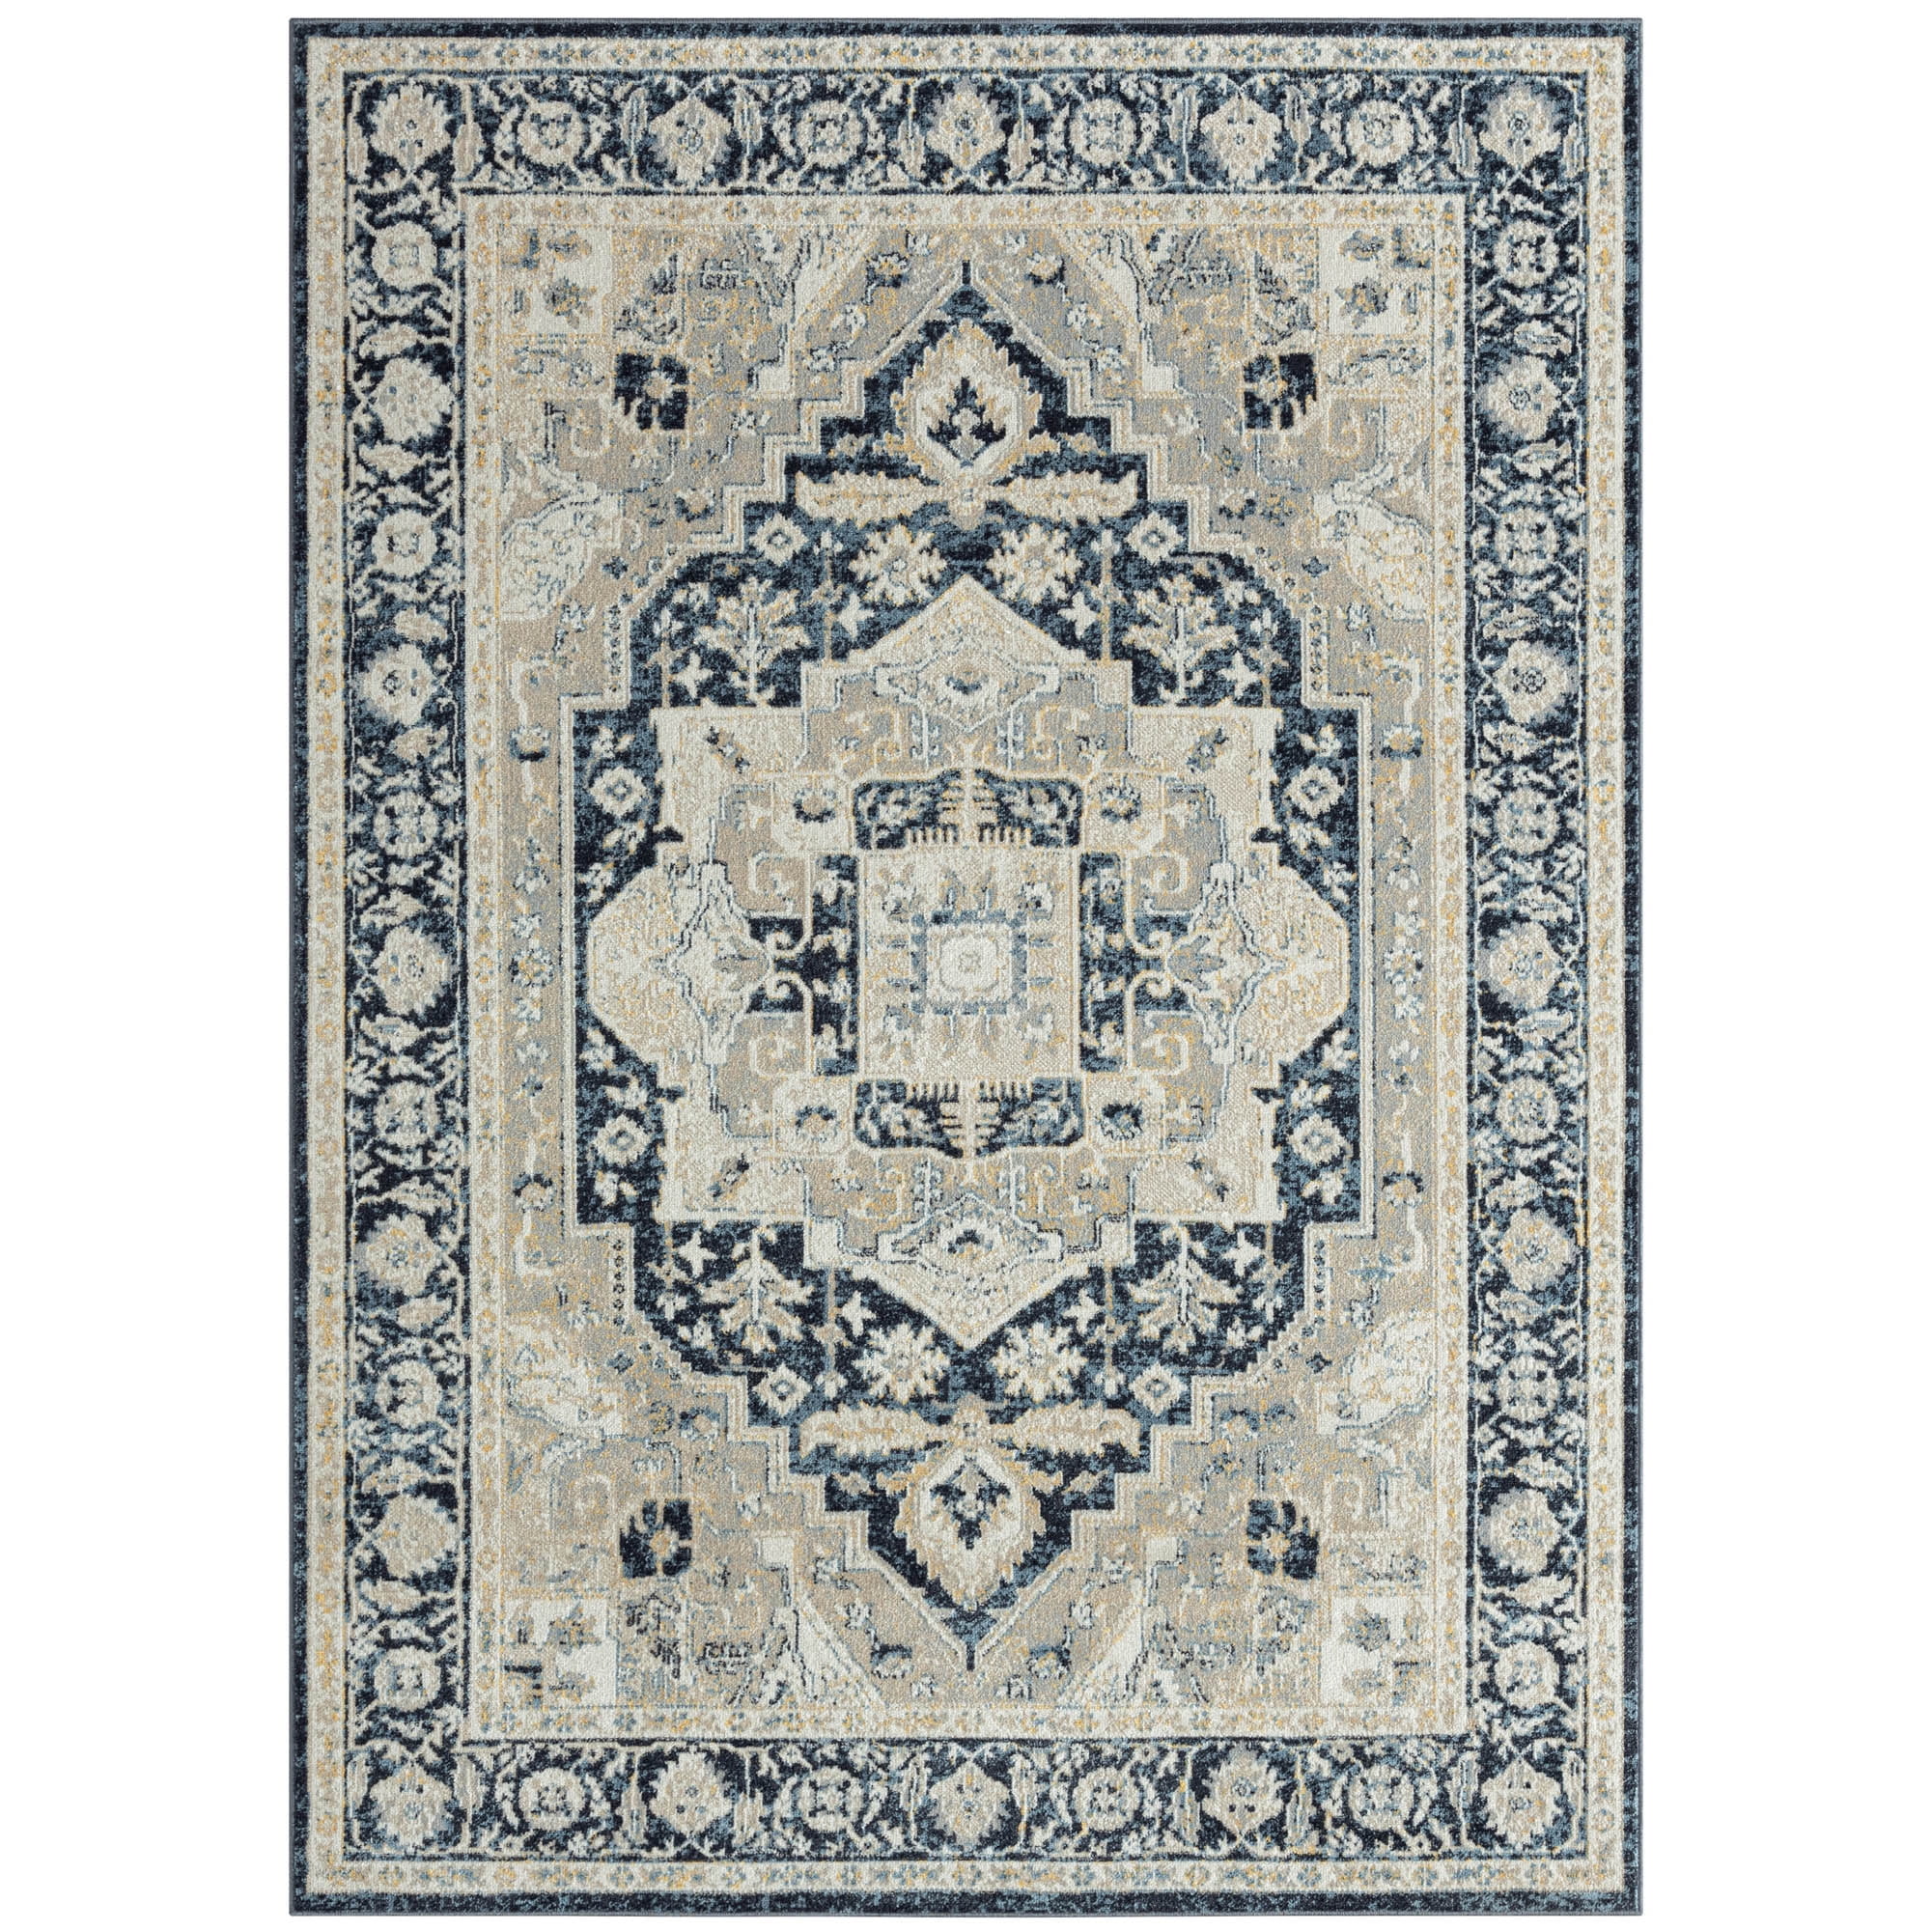 TOWN & COUNTRY EVERYDAY Walker Damask Medallion Everwash™ Washable  Multi-Use Decorative Rug, Tufted Kitchen Runner Rug, Low-Profile Door Mat,Bath  Rug with Non-Slip Backing, Navy Blue, 24x72 